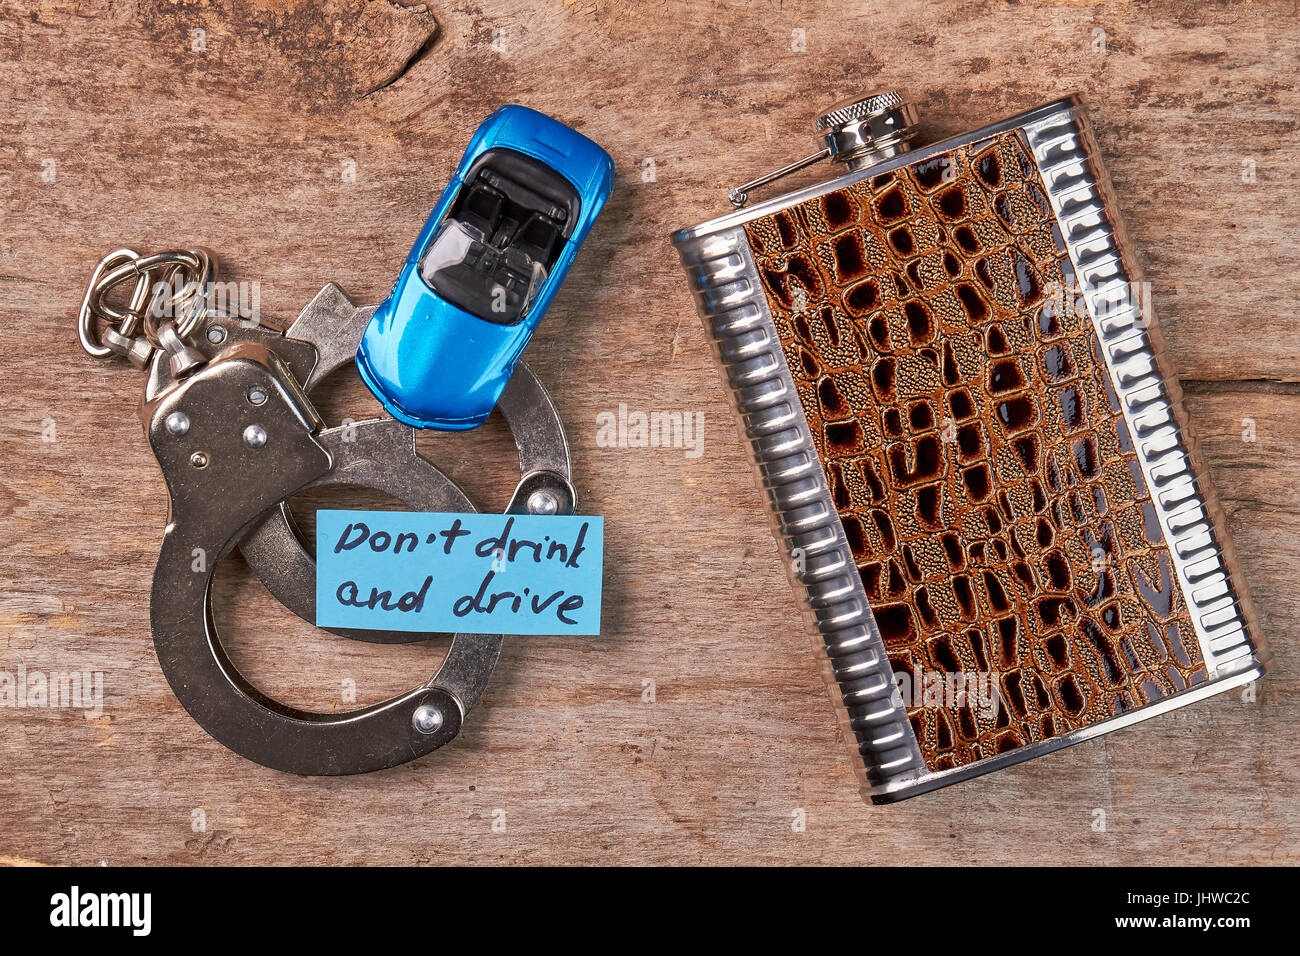 Handcuffs, toy car, message, hip flask. Stock Photo